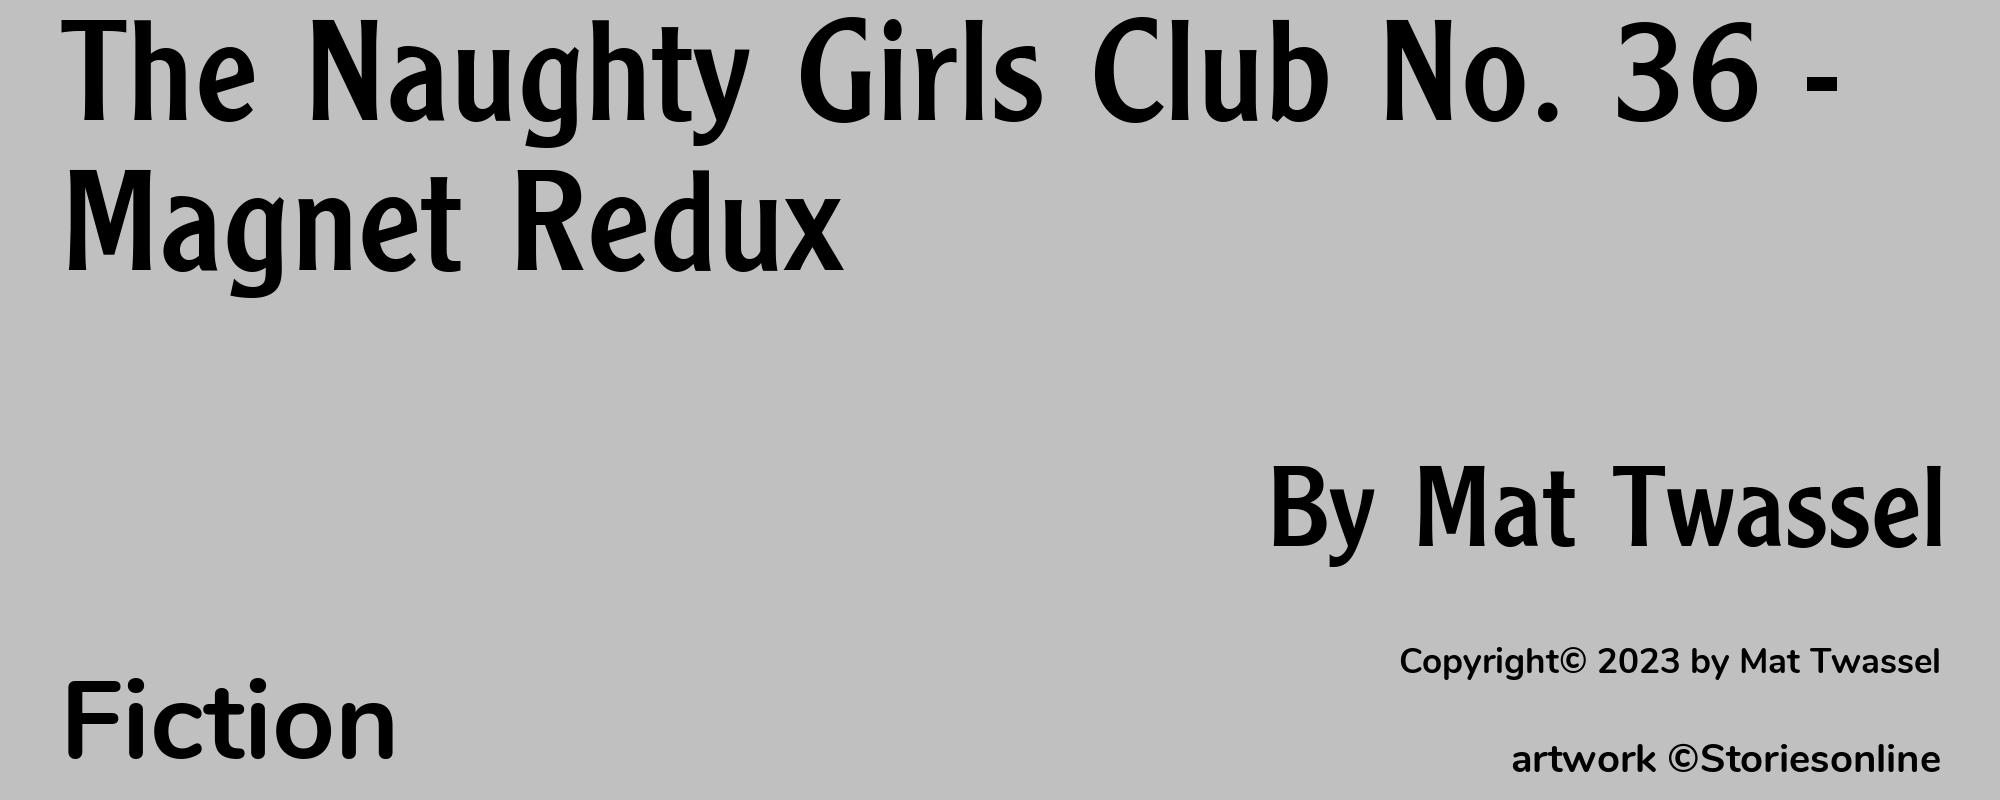 The Naughty Girls Club No. 36 - Magnet Redux - Cover